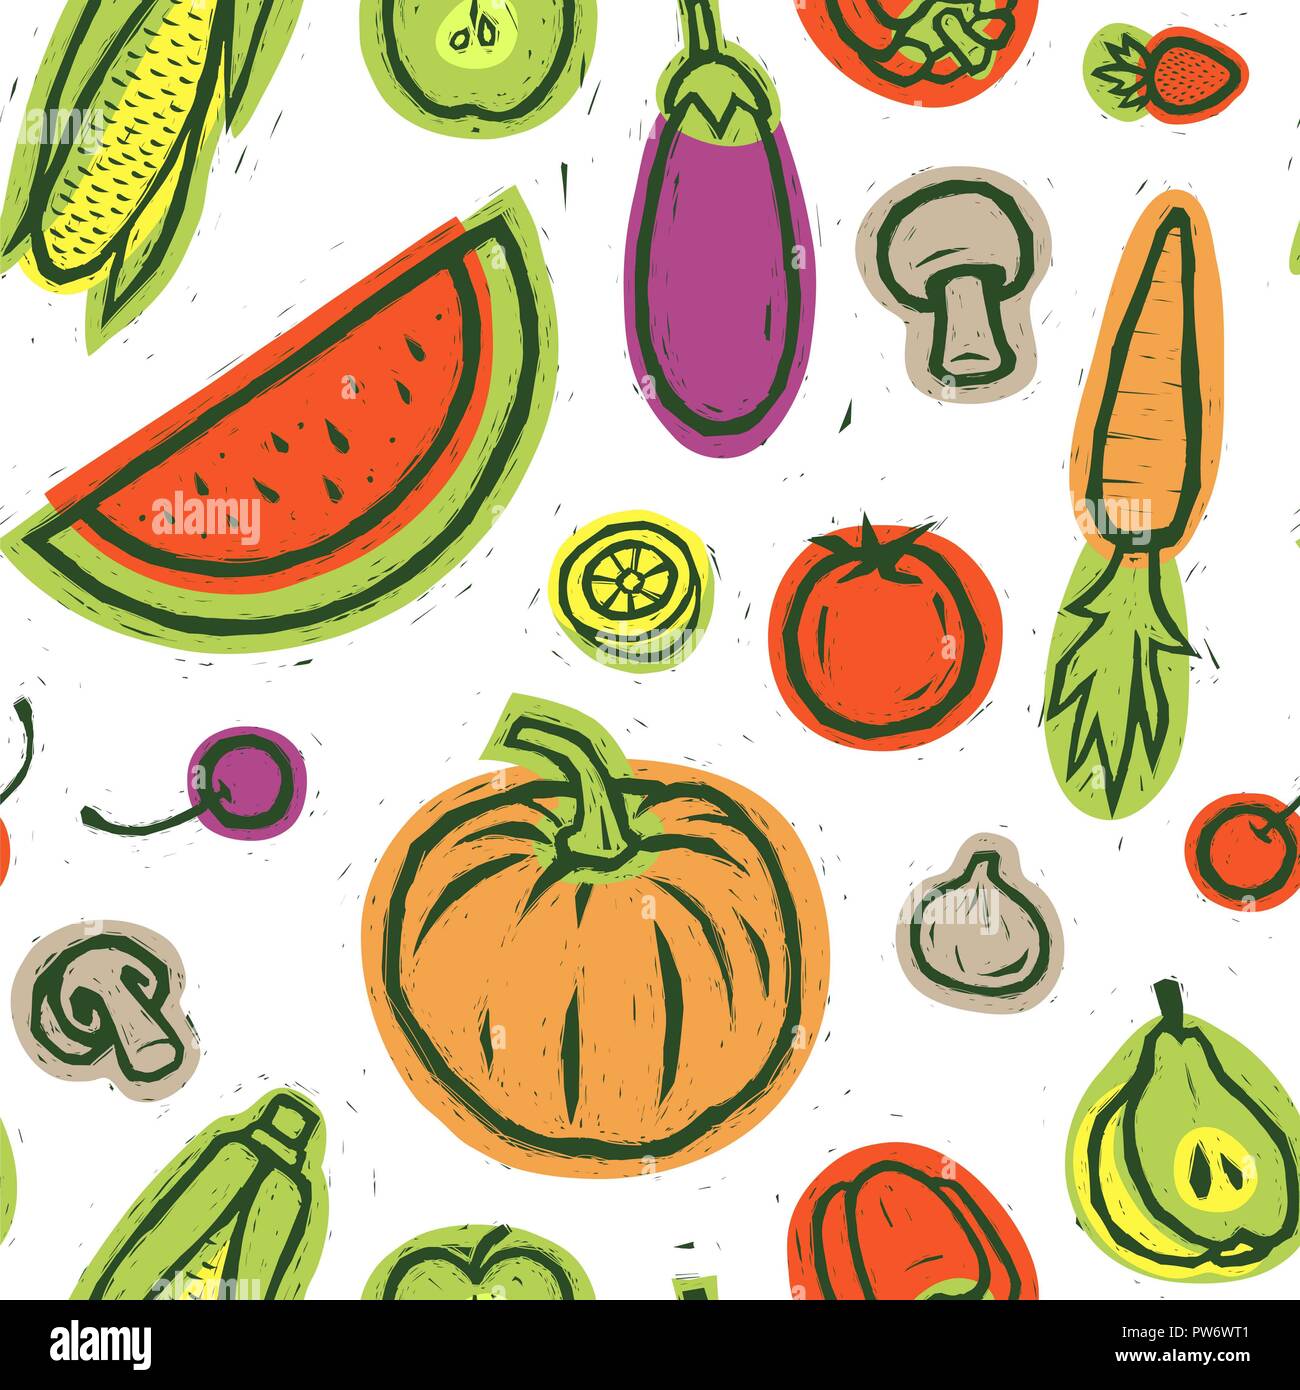 Colorful vegetables and fruits vector illustration. Food print. Hand-drawn vector wallpaper with fruits and vegetables. Stock Photo